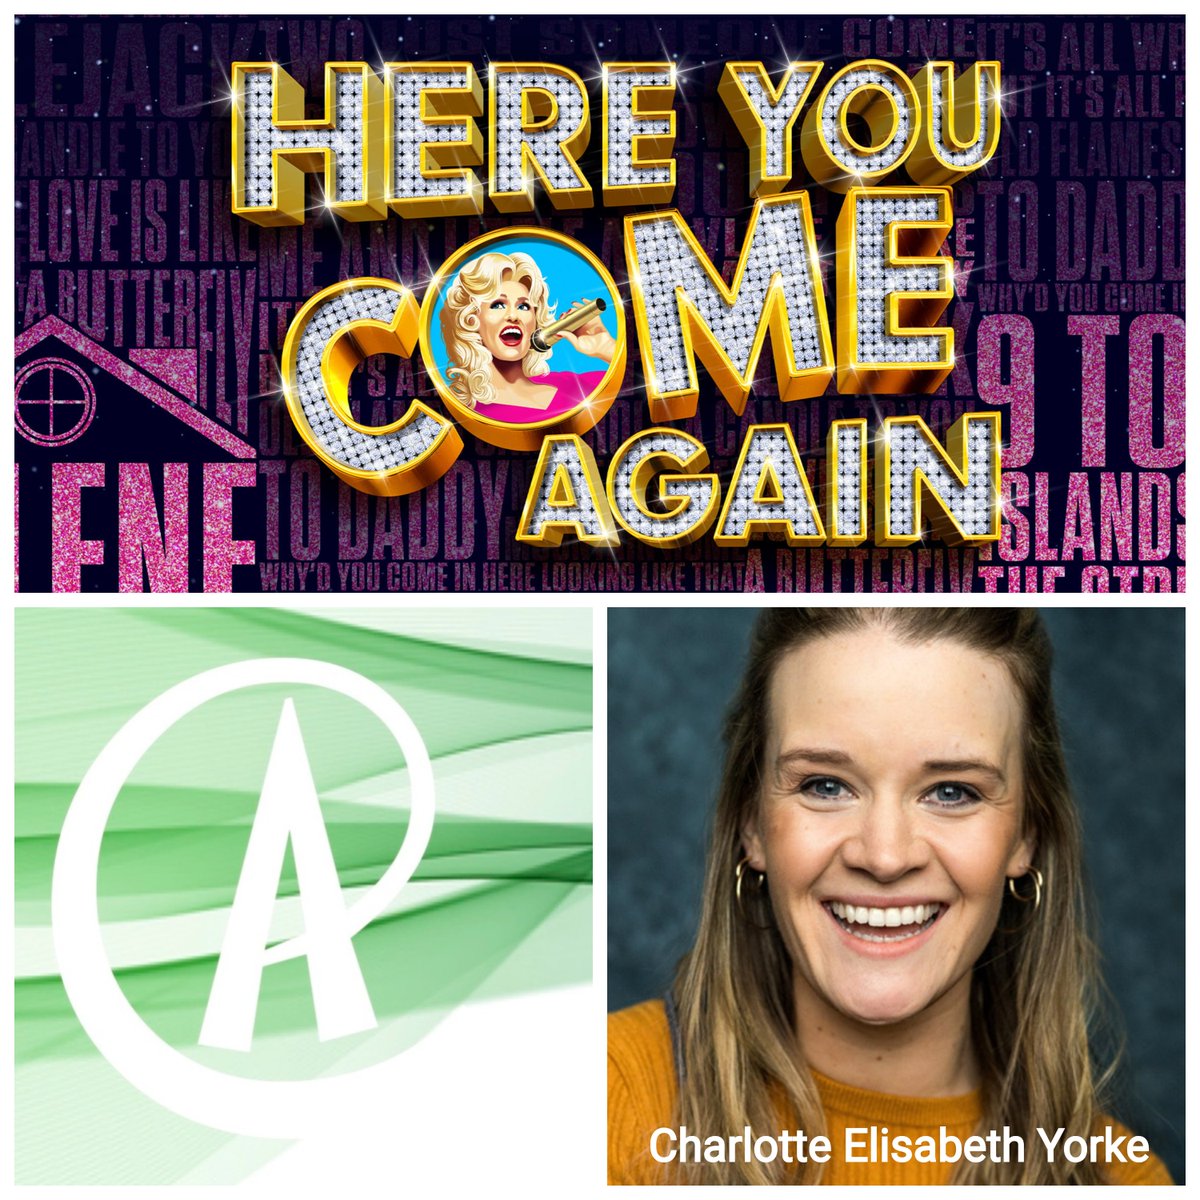 Best wishes to @charlotteeyorke for the opening night of #HereYouComeAgain (@LeedsPlayhouse and UK Tour) this evening.

Casting by: @StuartBCasting

hereyoucomeagain.co.uk